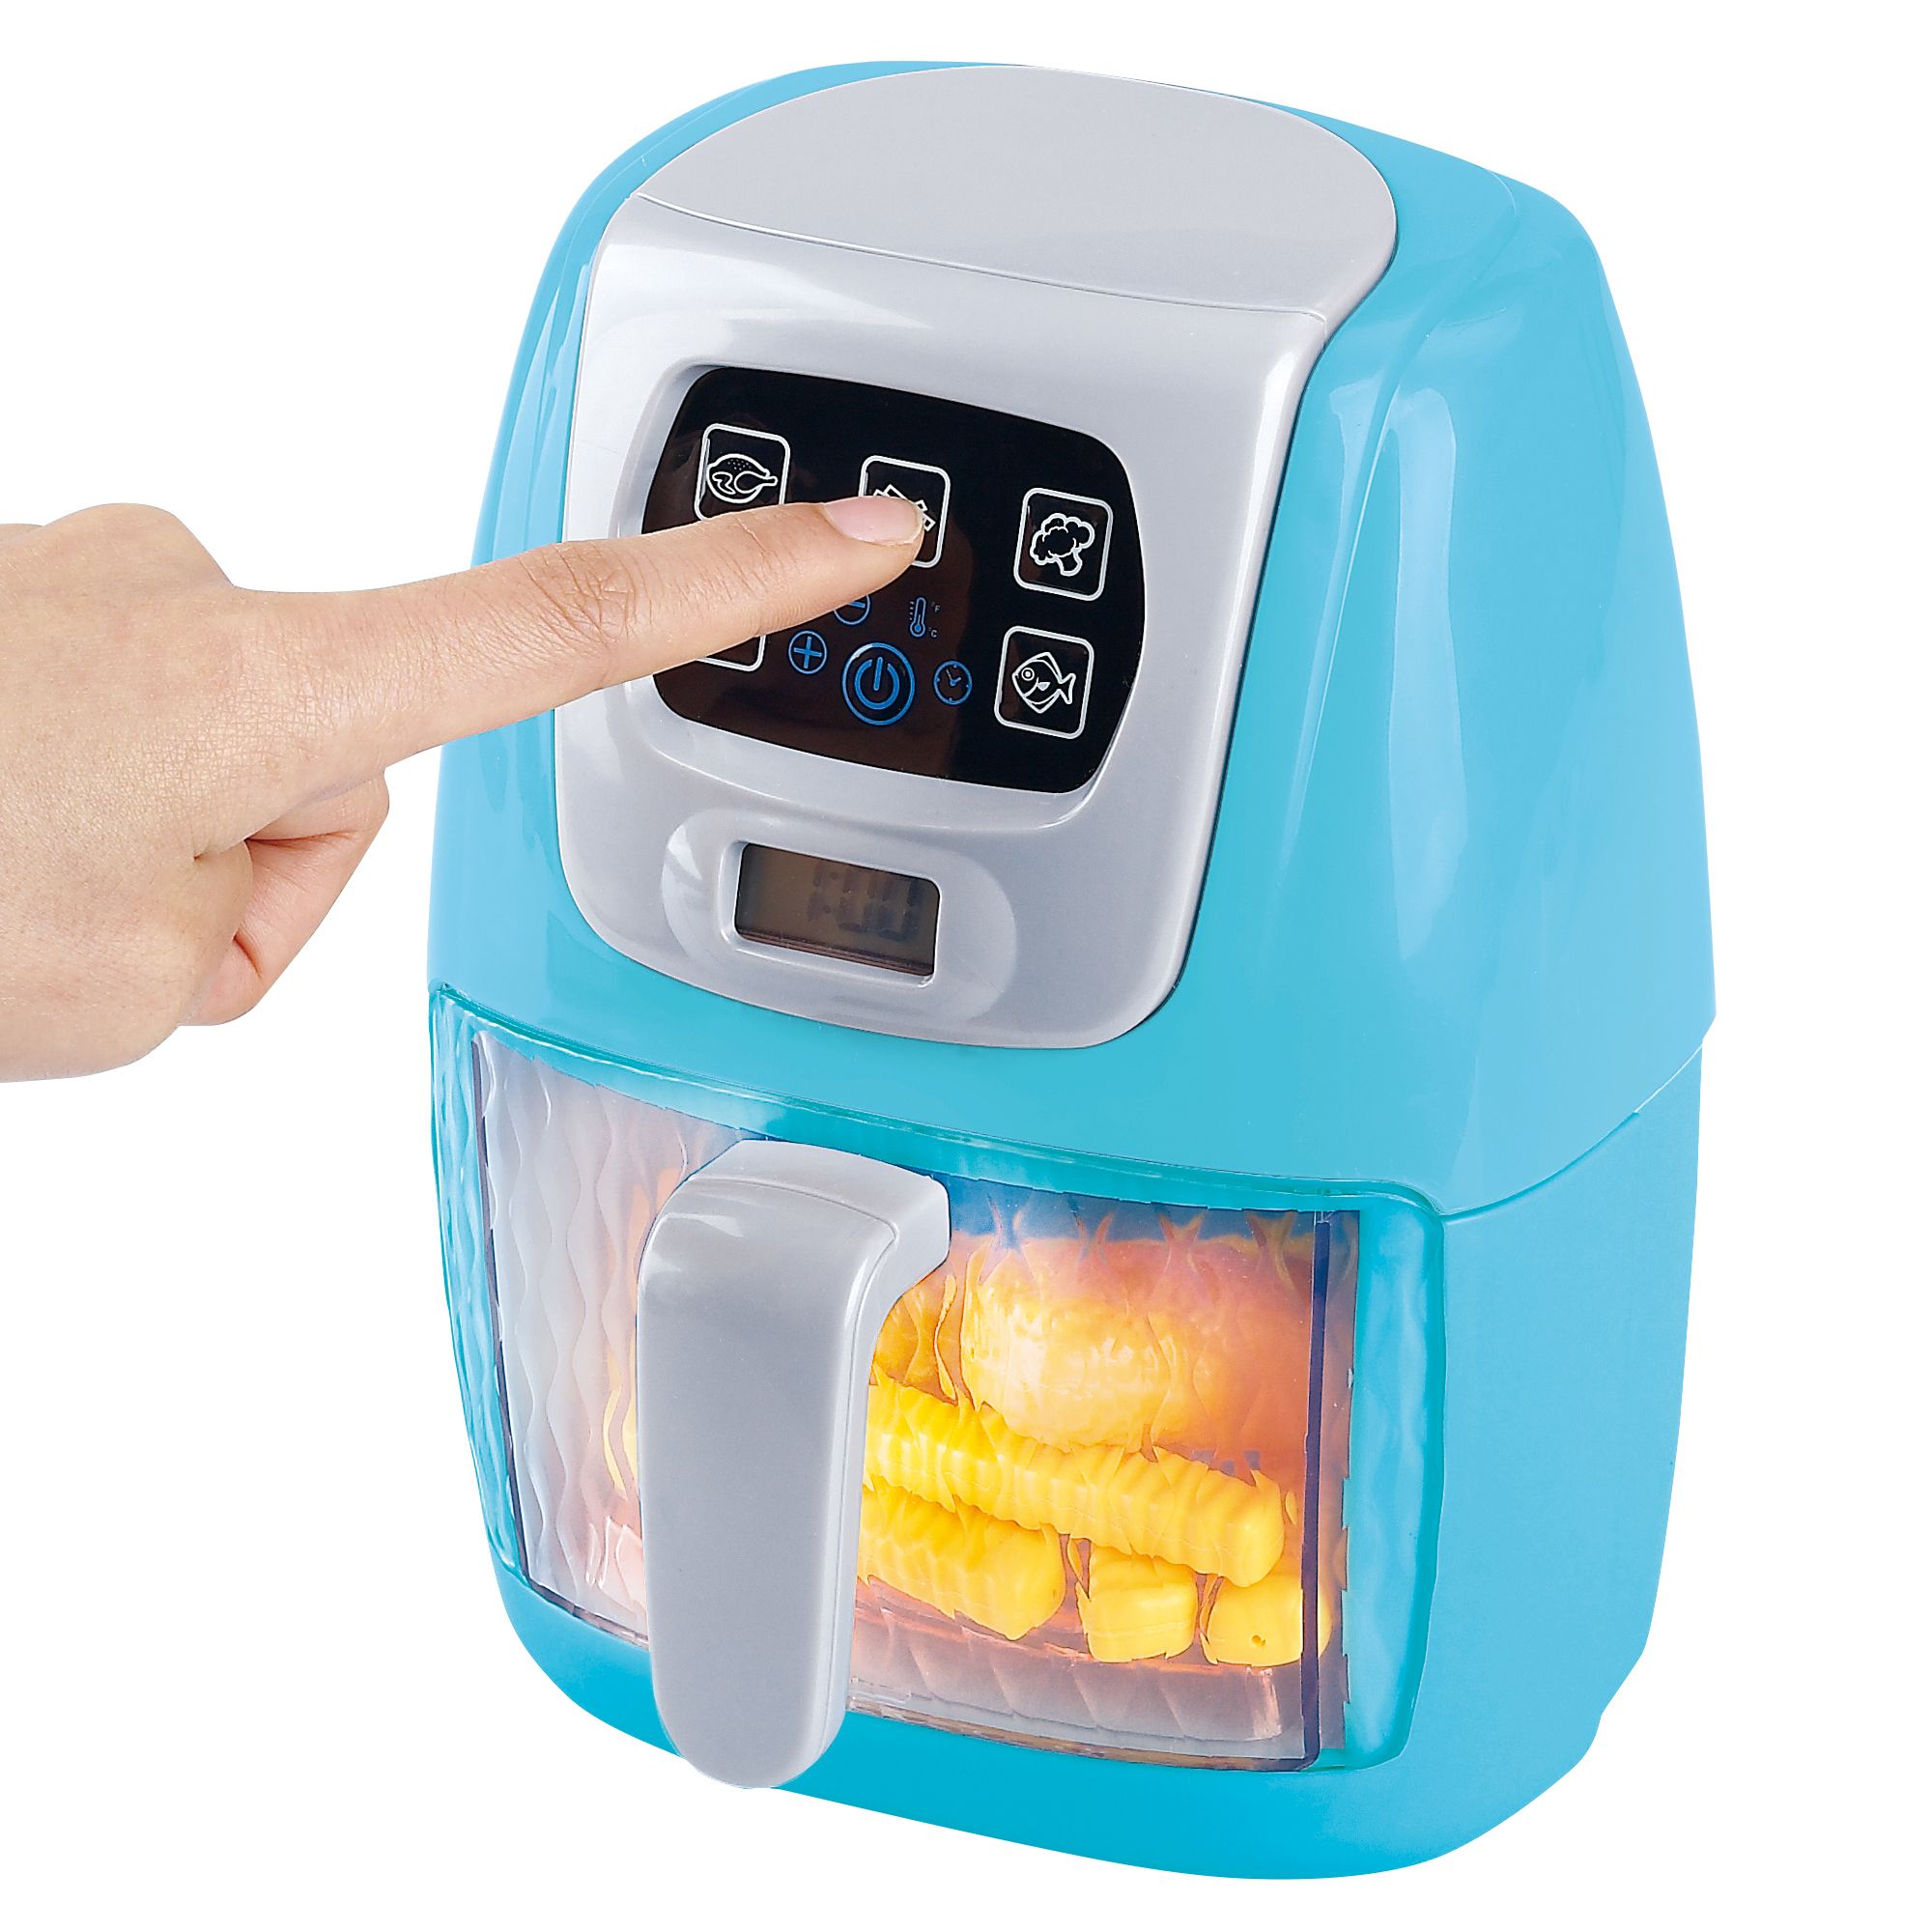 Kids Air Fryer Set Color Changing Little Chef Pretend Play Grill